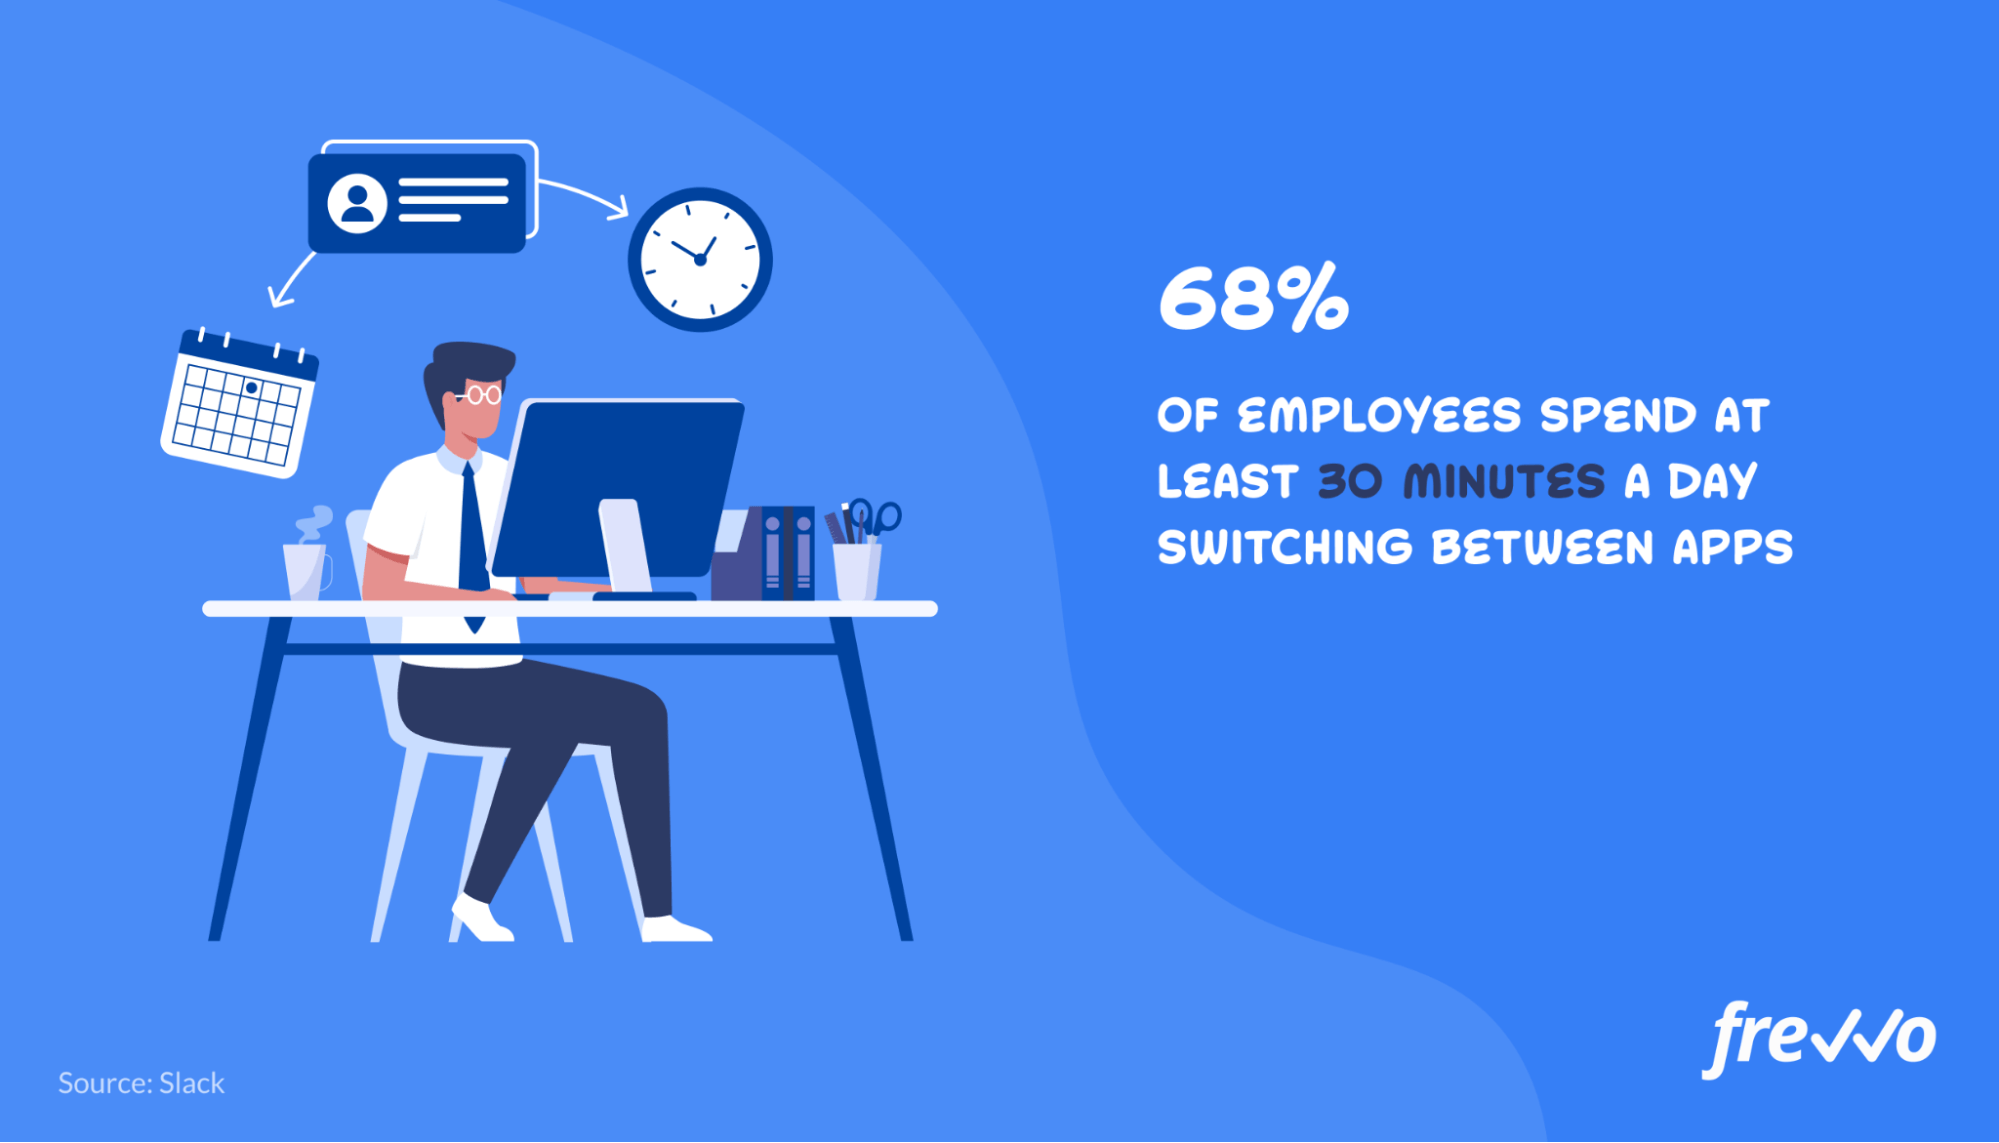 68% of employees spend at least 30 minutes a day switching between apps